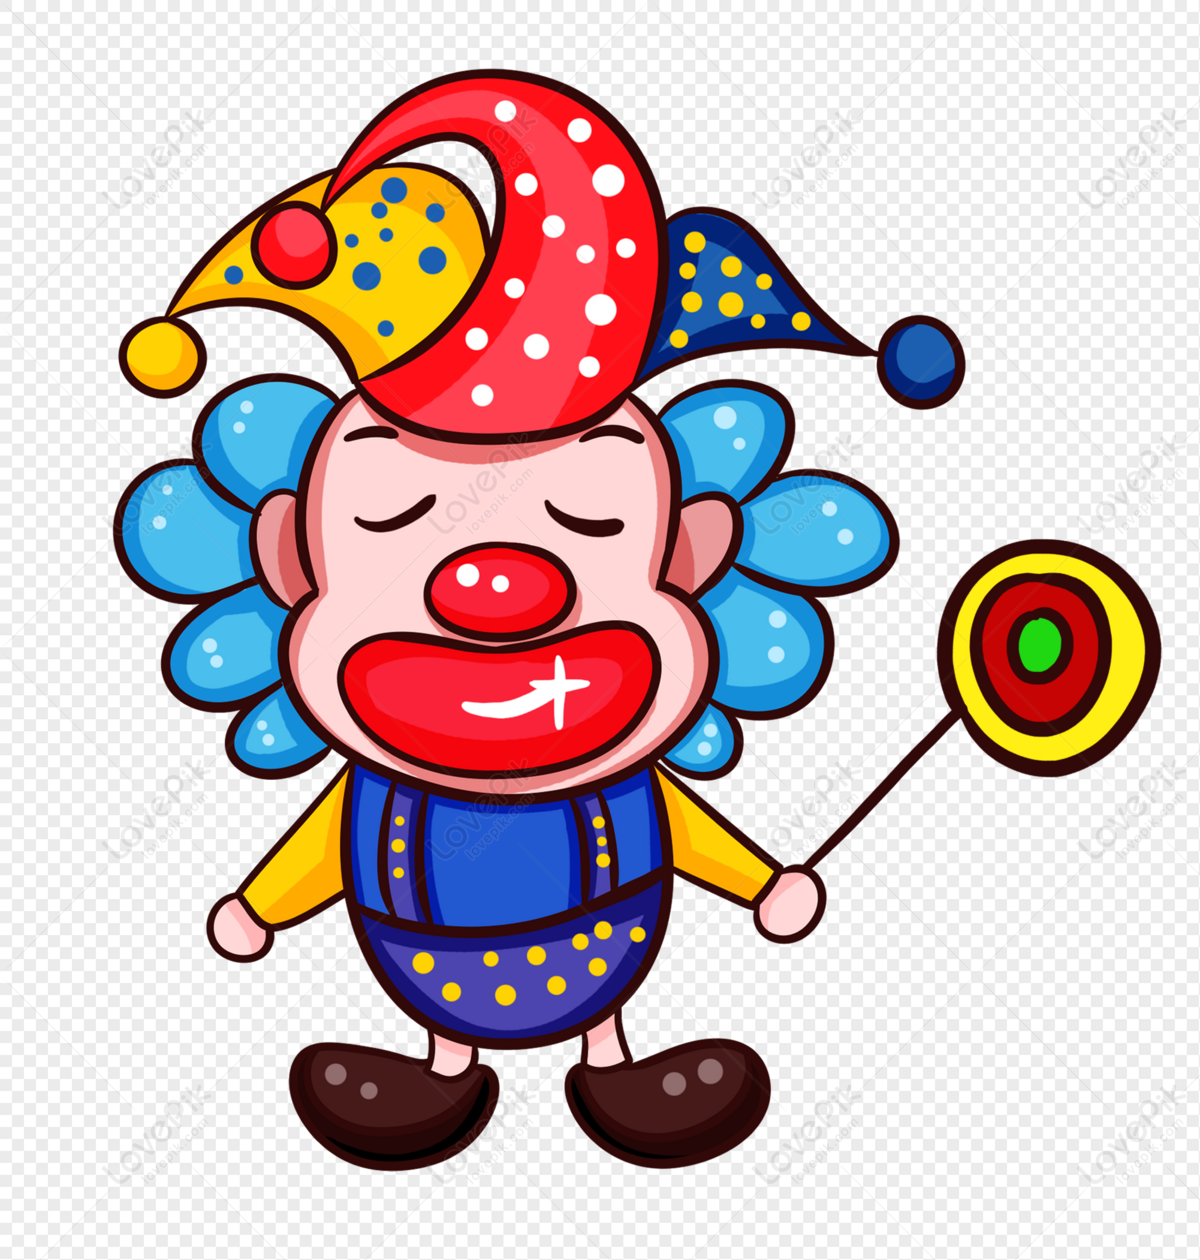 The Expression Of The Proud Clown PNG Picture And Clipart Image For Free  Download - Lovepik | 400976265